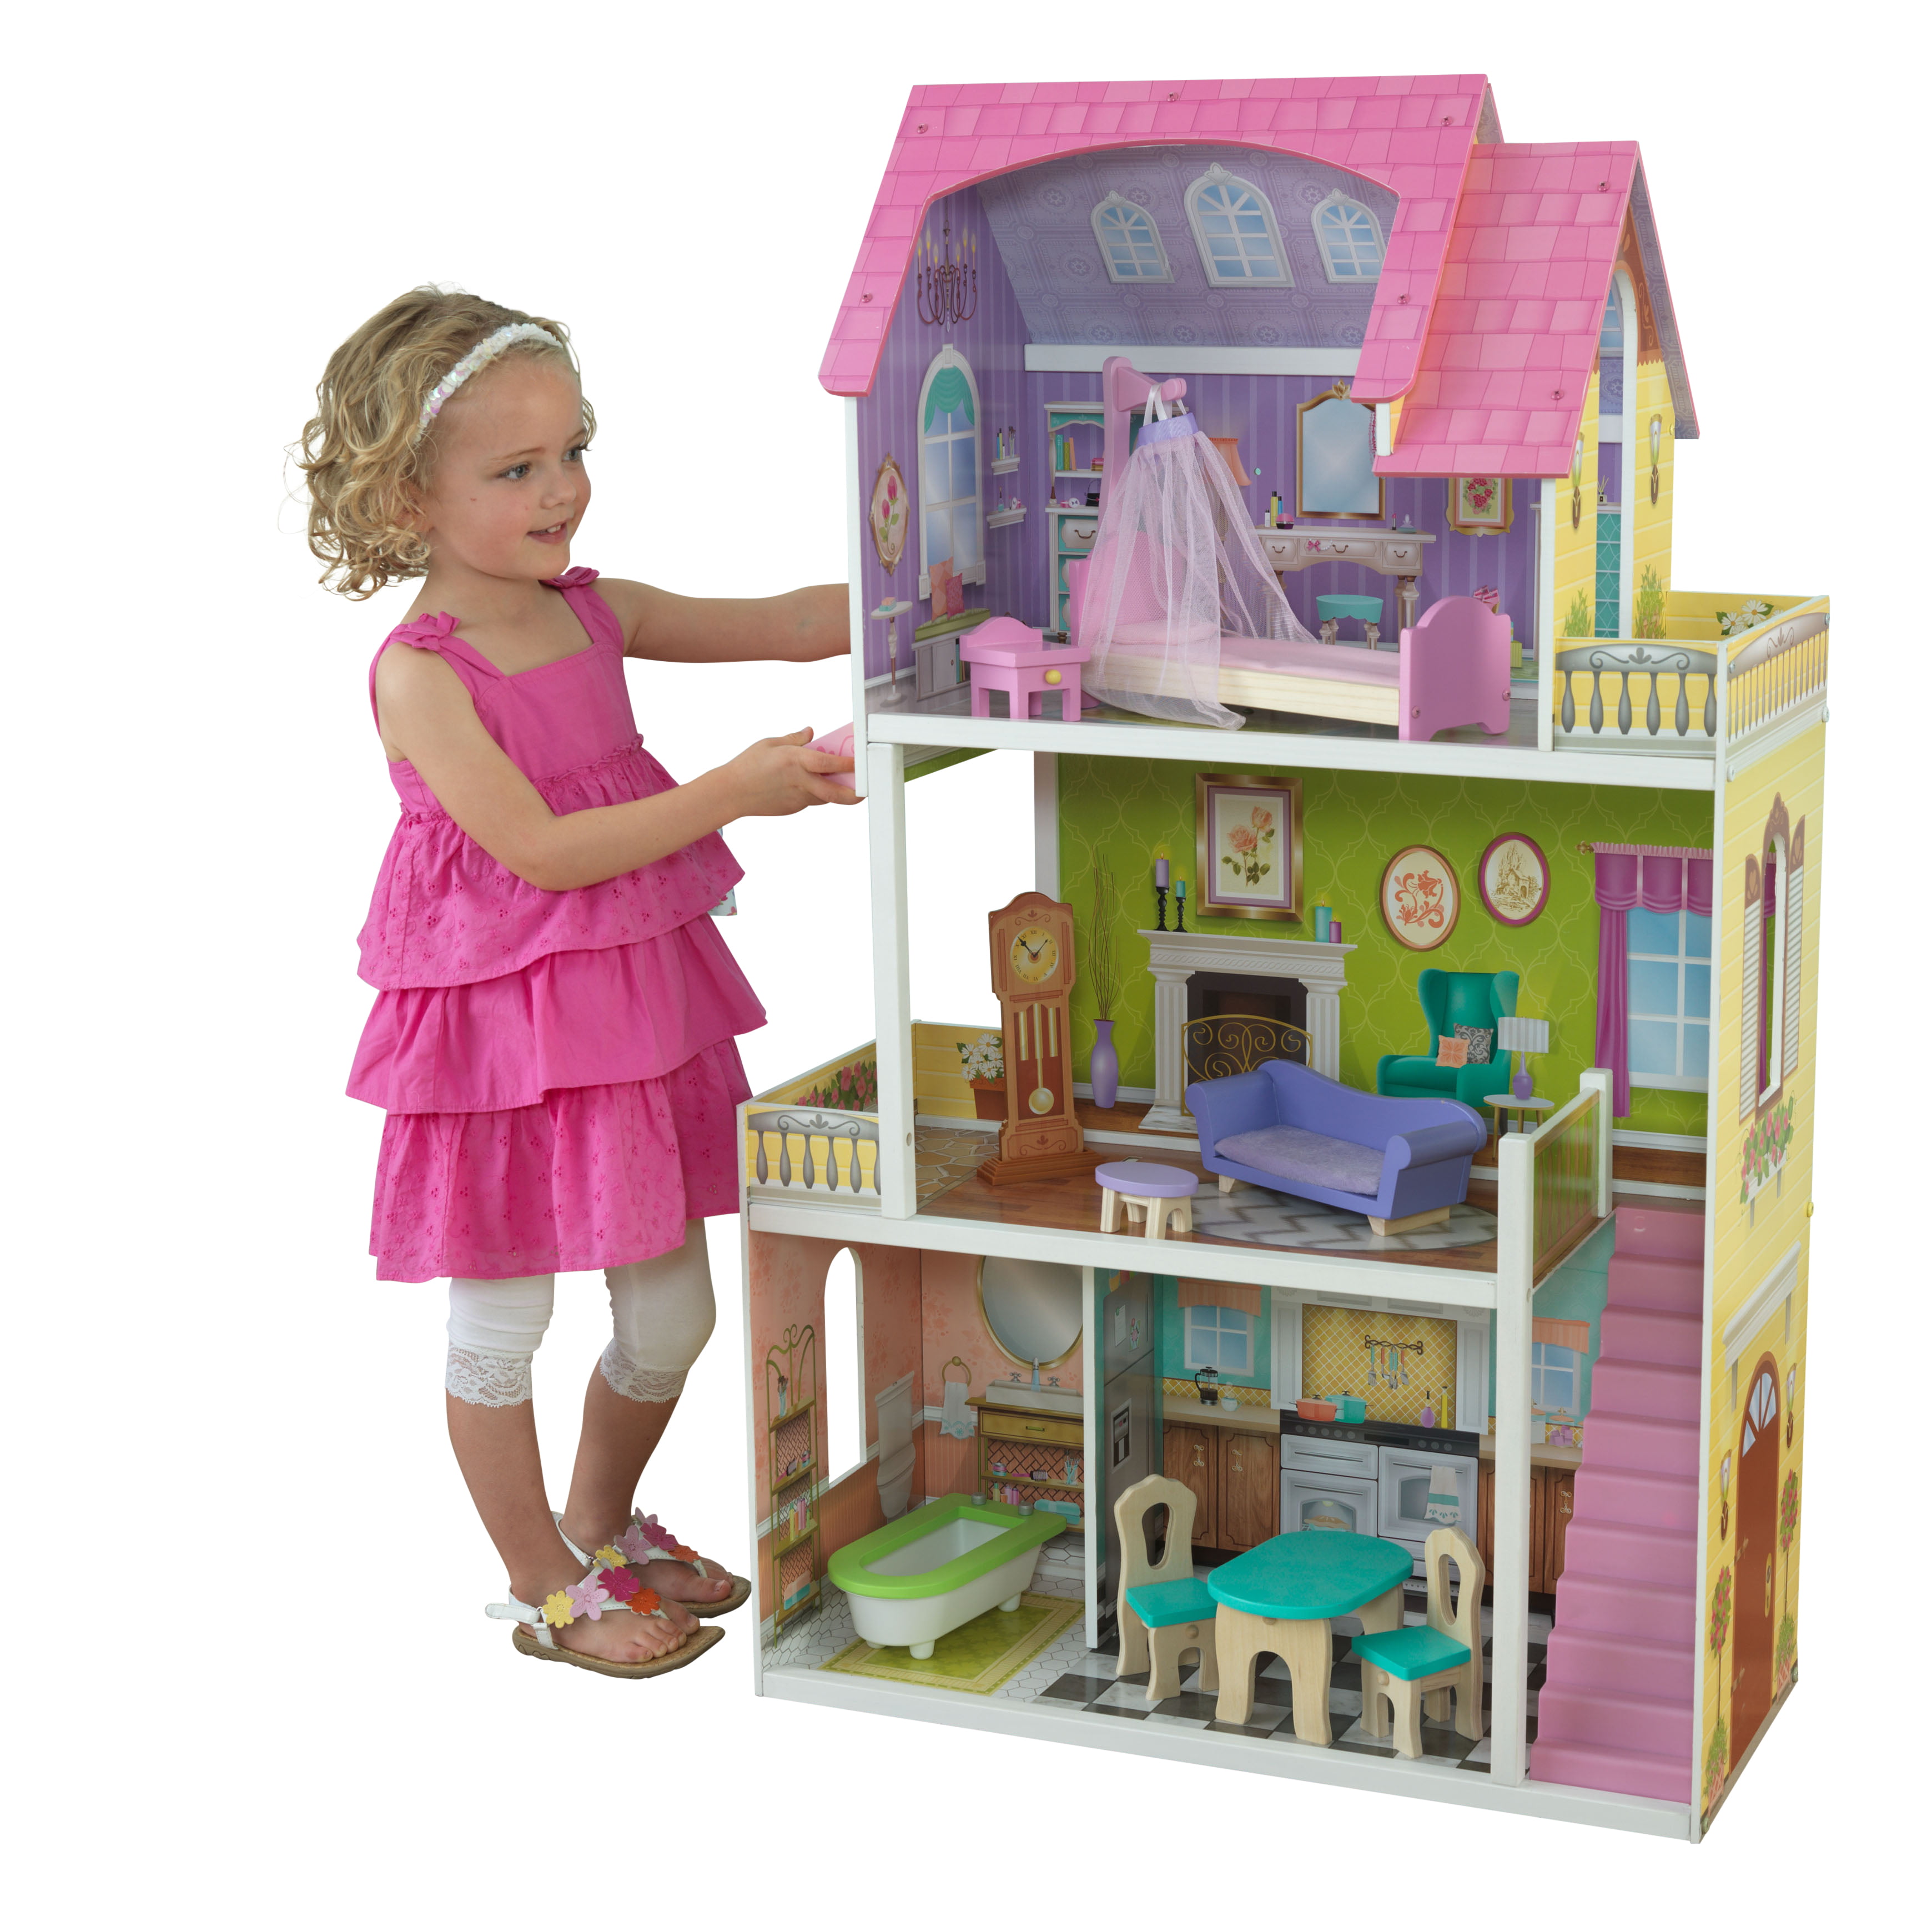 SuperModel Doll house 11 Accessories Set Barbie Kids Playhouse Toy Girls HOT NEW